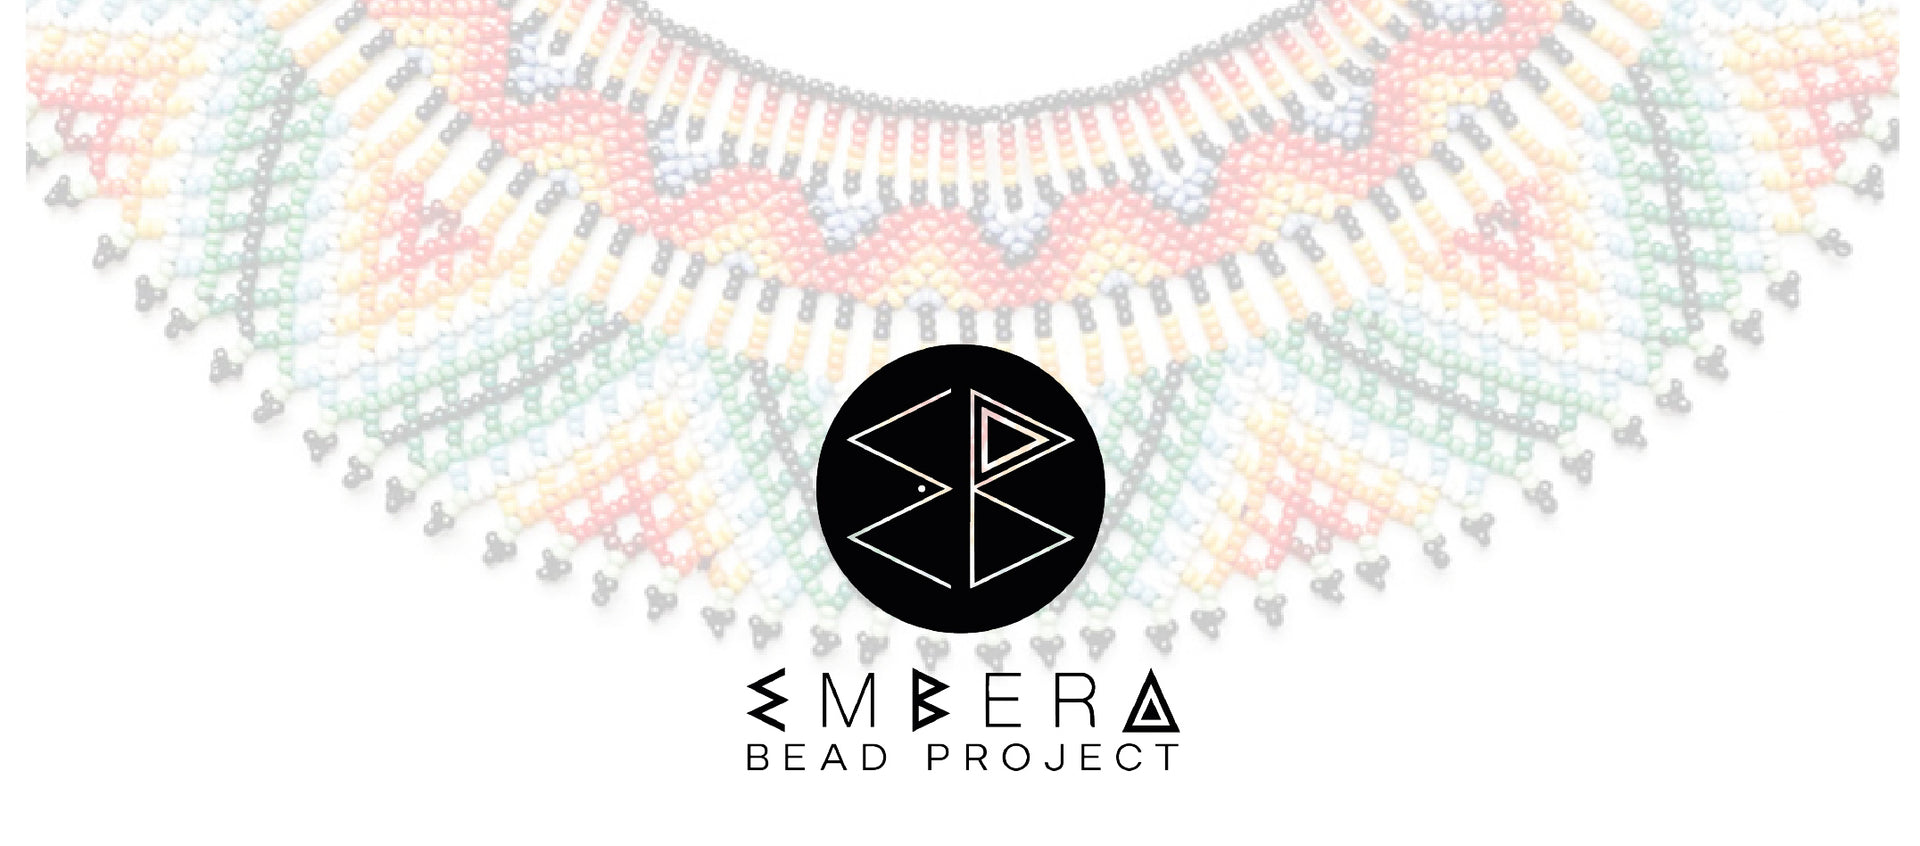 Multicolor Embera Bead Project Necklace with Logo